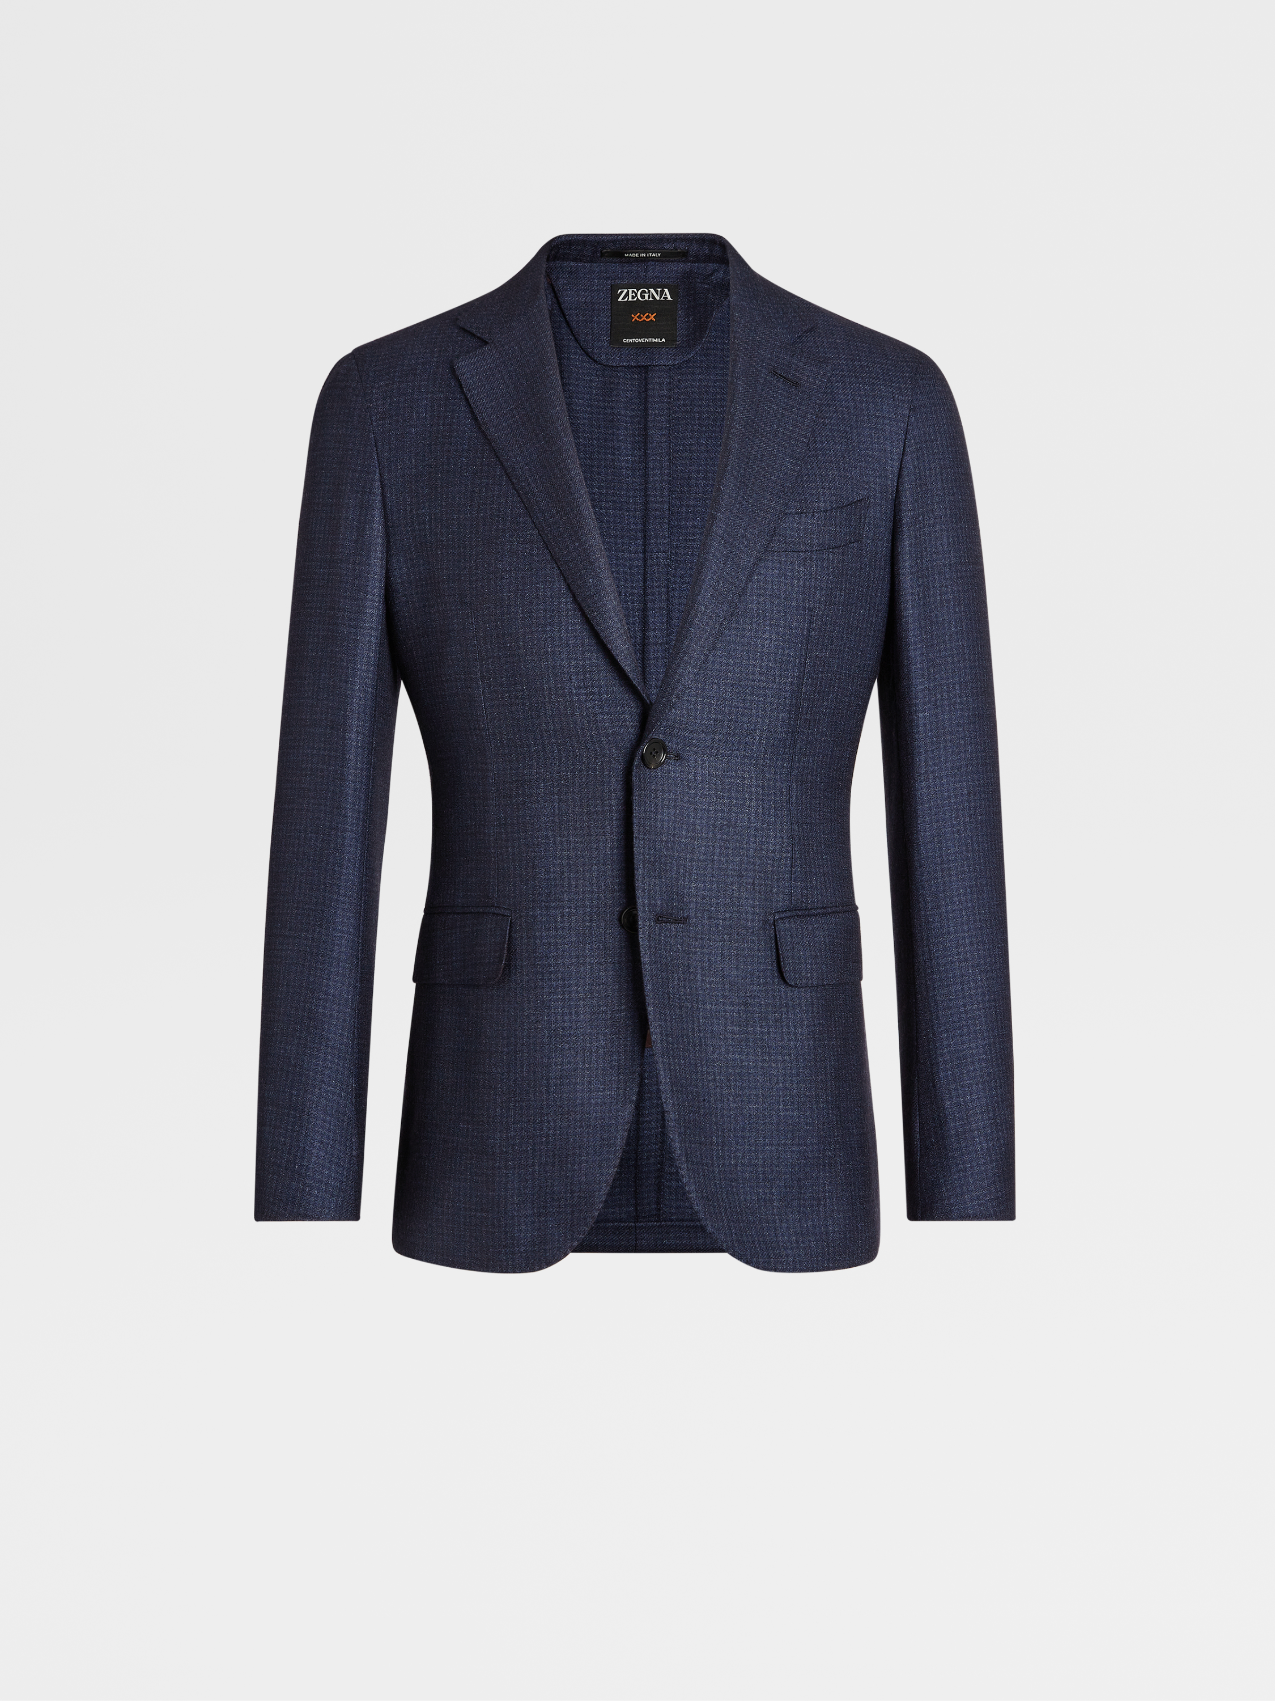 Blue and Navy Blue Cashmere and Silk Cardigan Jacket